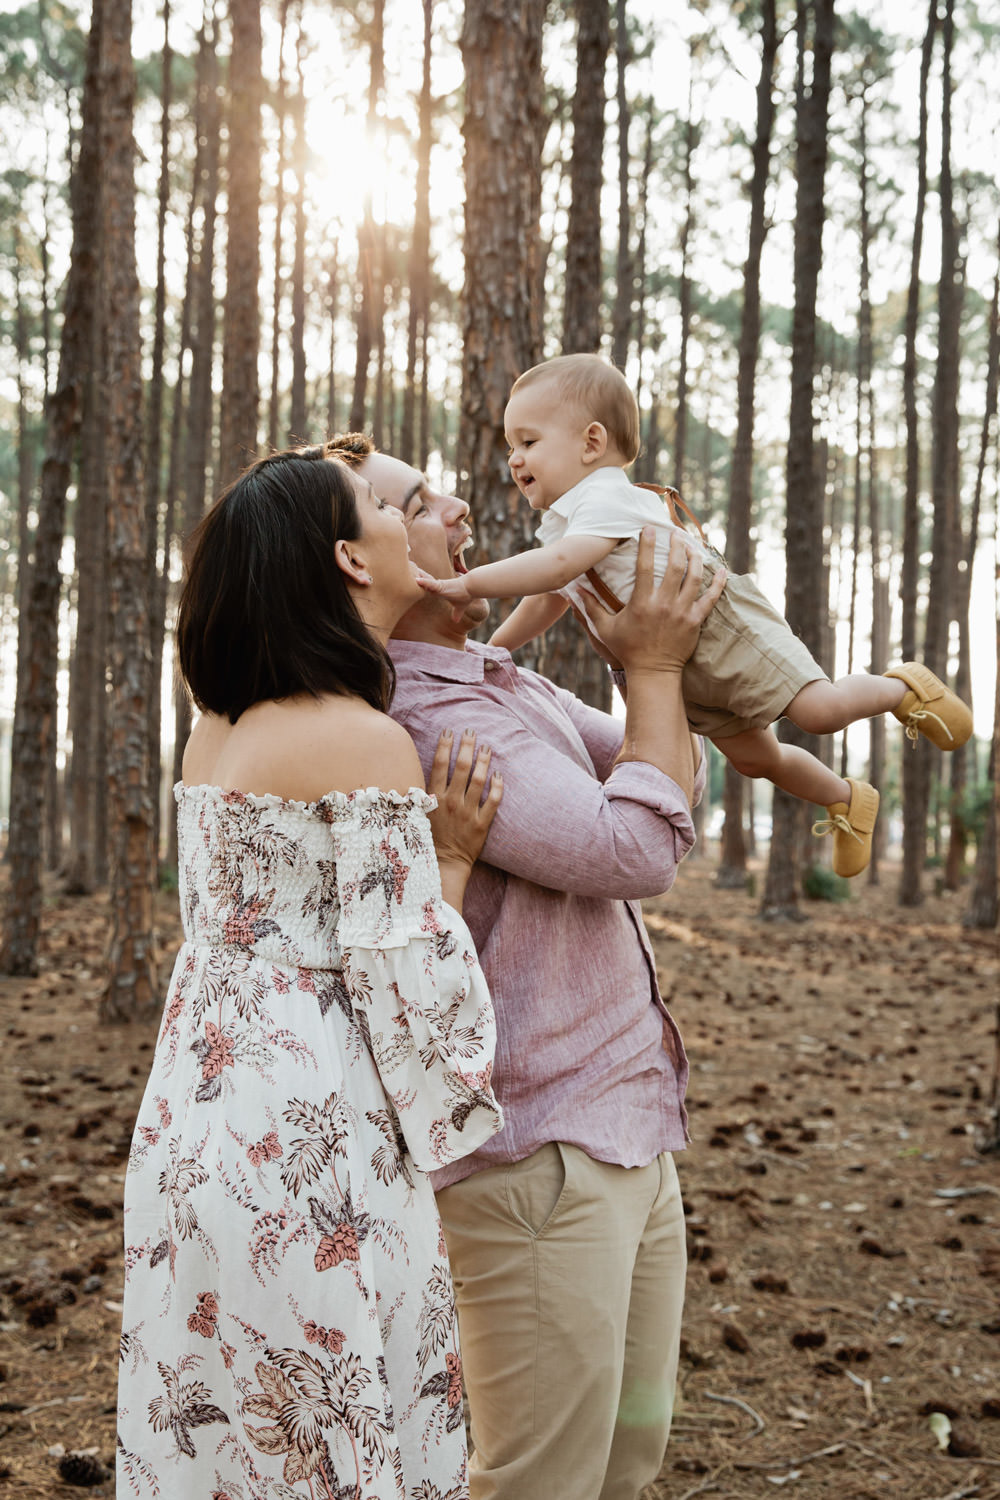 Joyful-Newborn_to-first-year-Family-Photography-Packages_Beach_Brisbane-GoldCoast-Natural